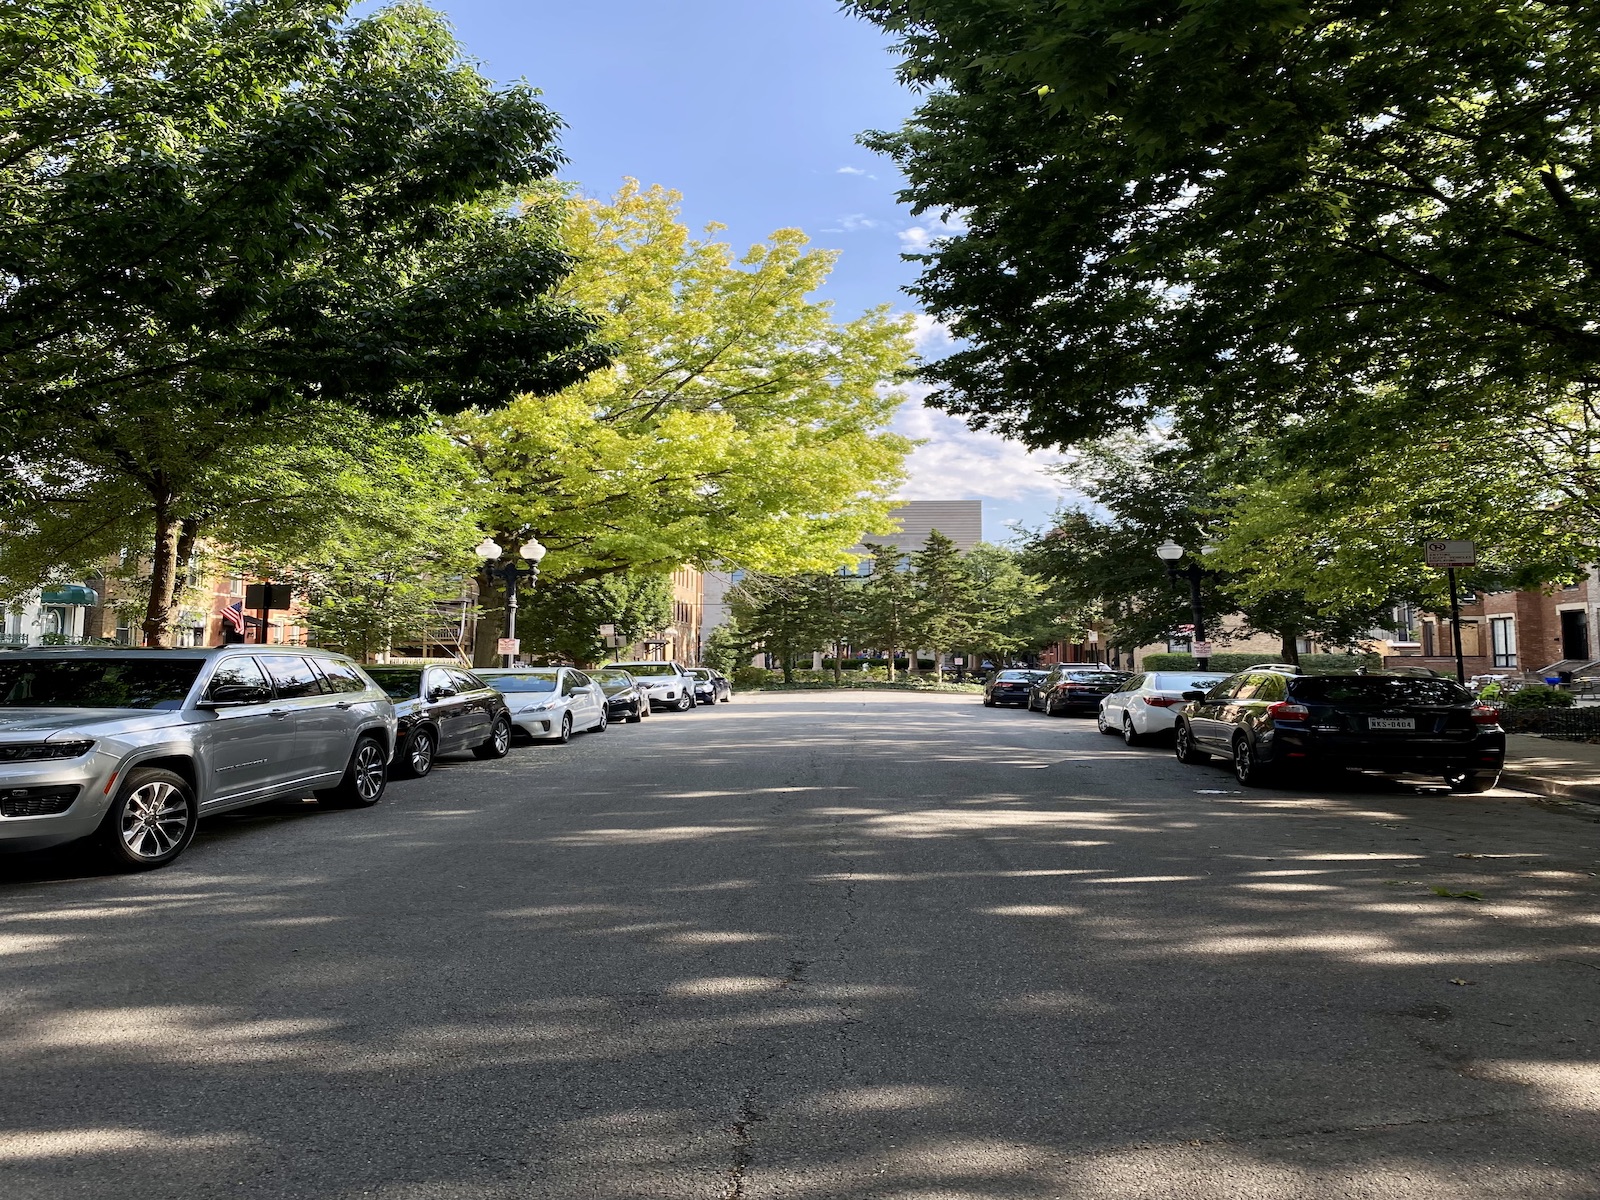 No outlet street with cars parked on both sides. The sidewalks are lined with trees.